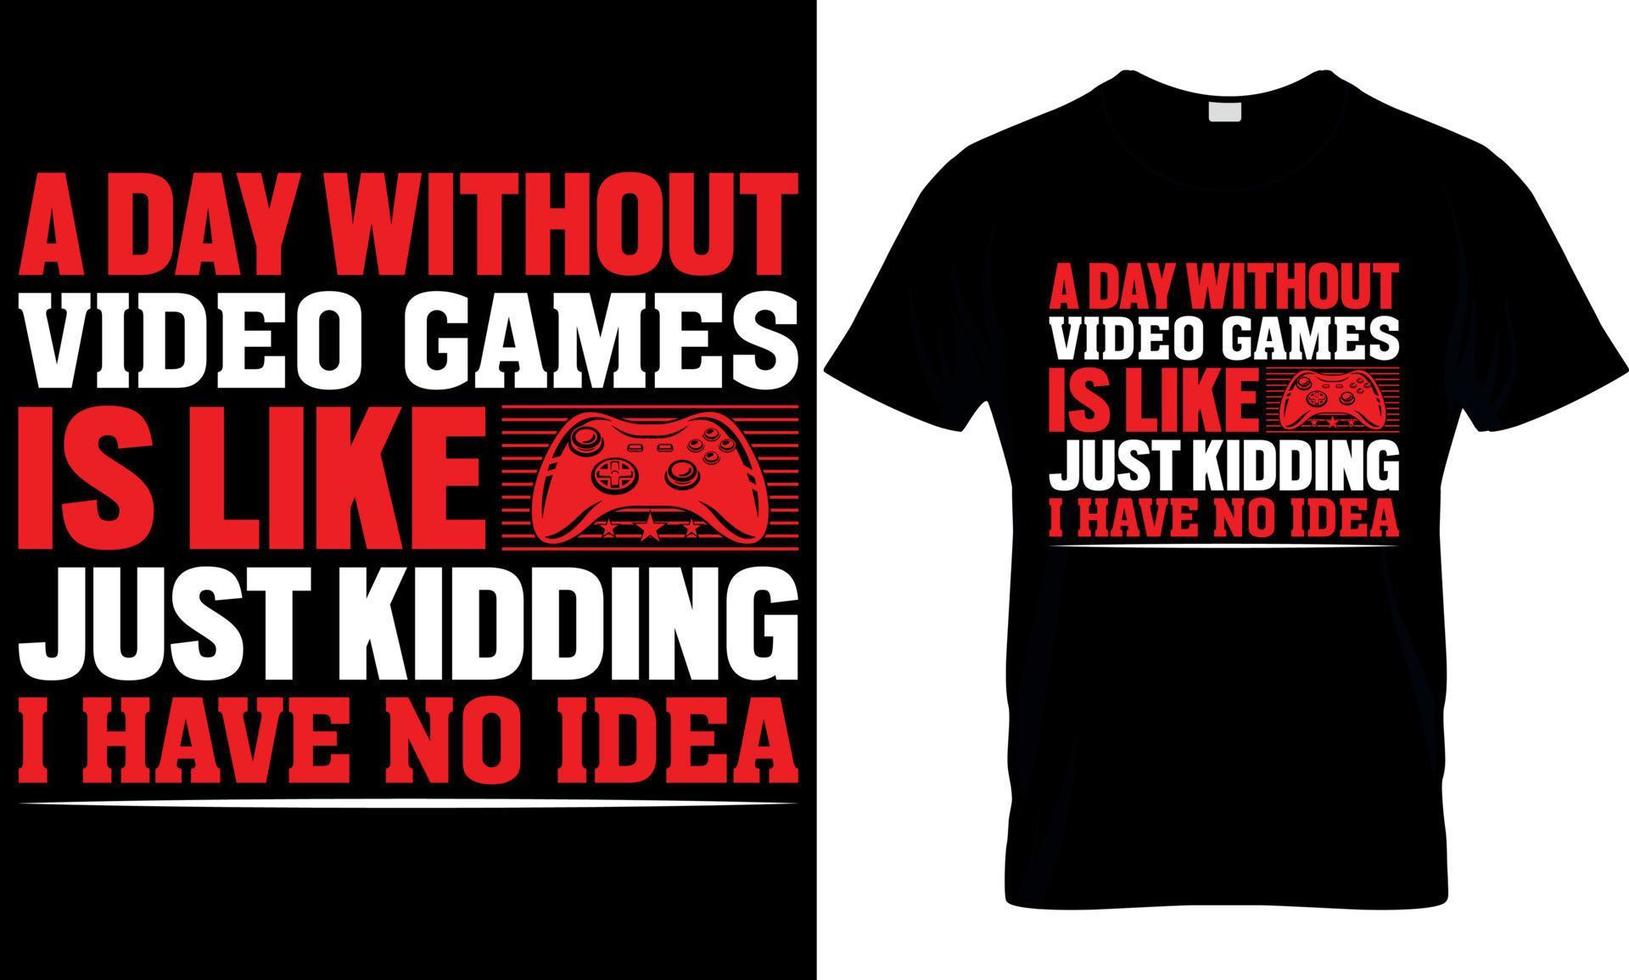 gaming t-shirt design. gaming t shirt design. game design. game t shirt design.games t shirt design.. a day without video games is like just kidding I have no idea. vector